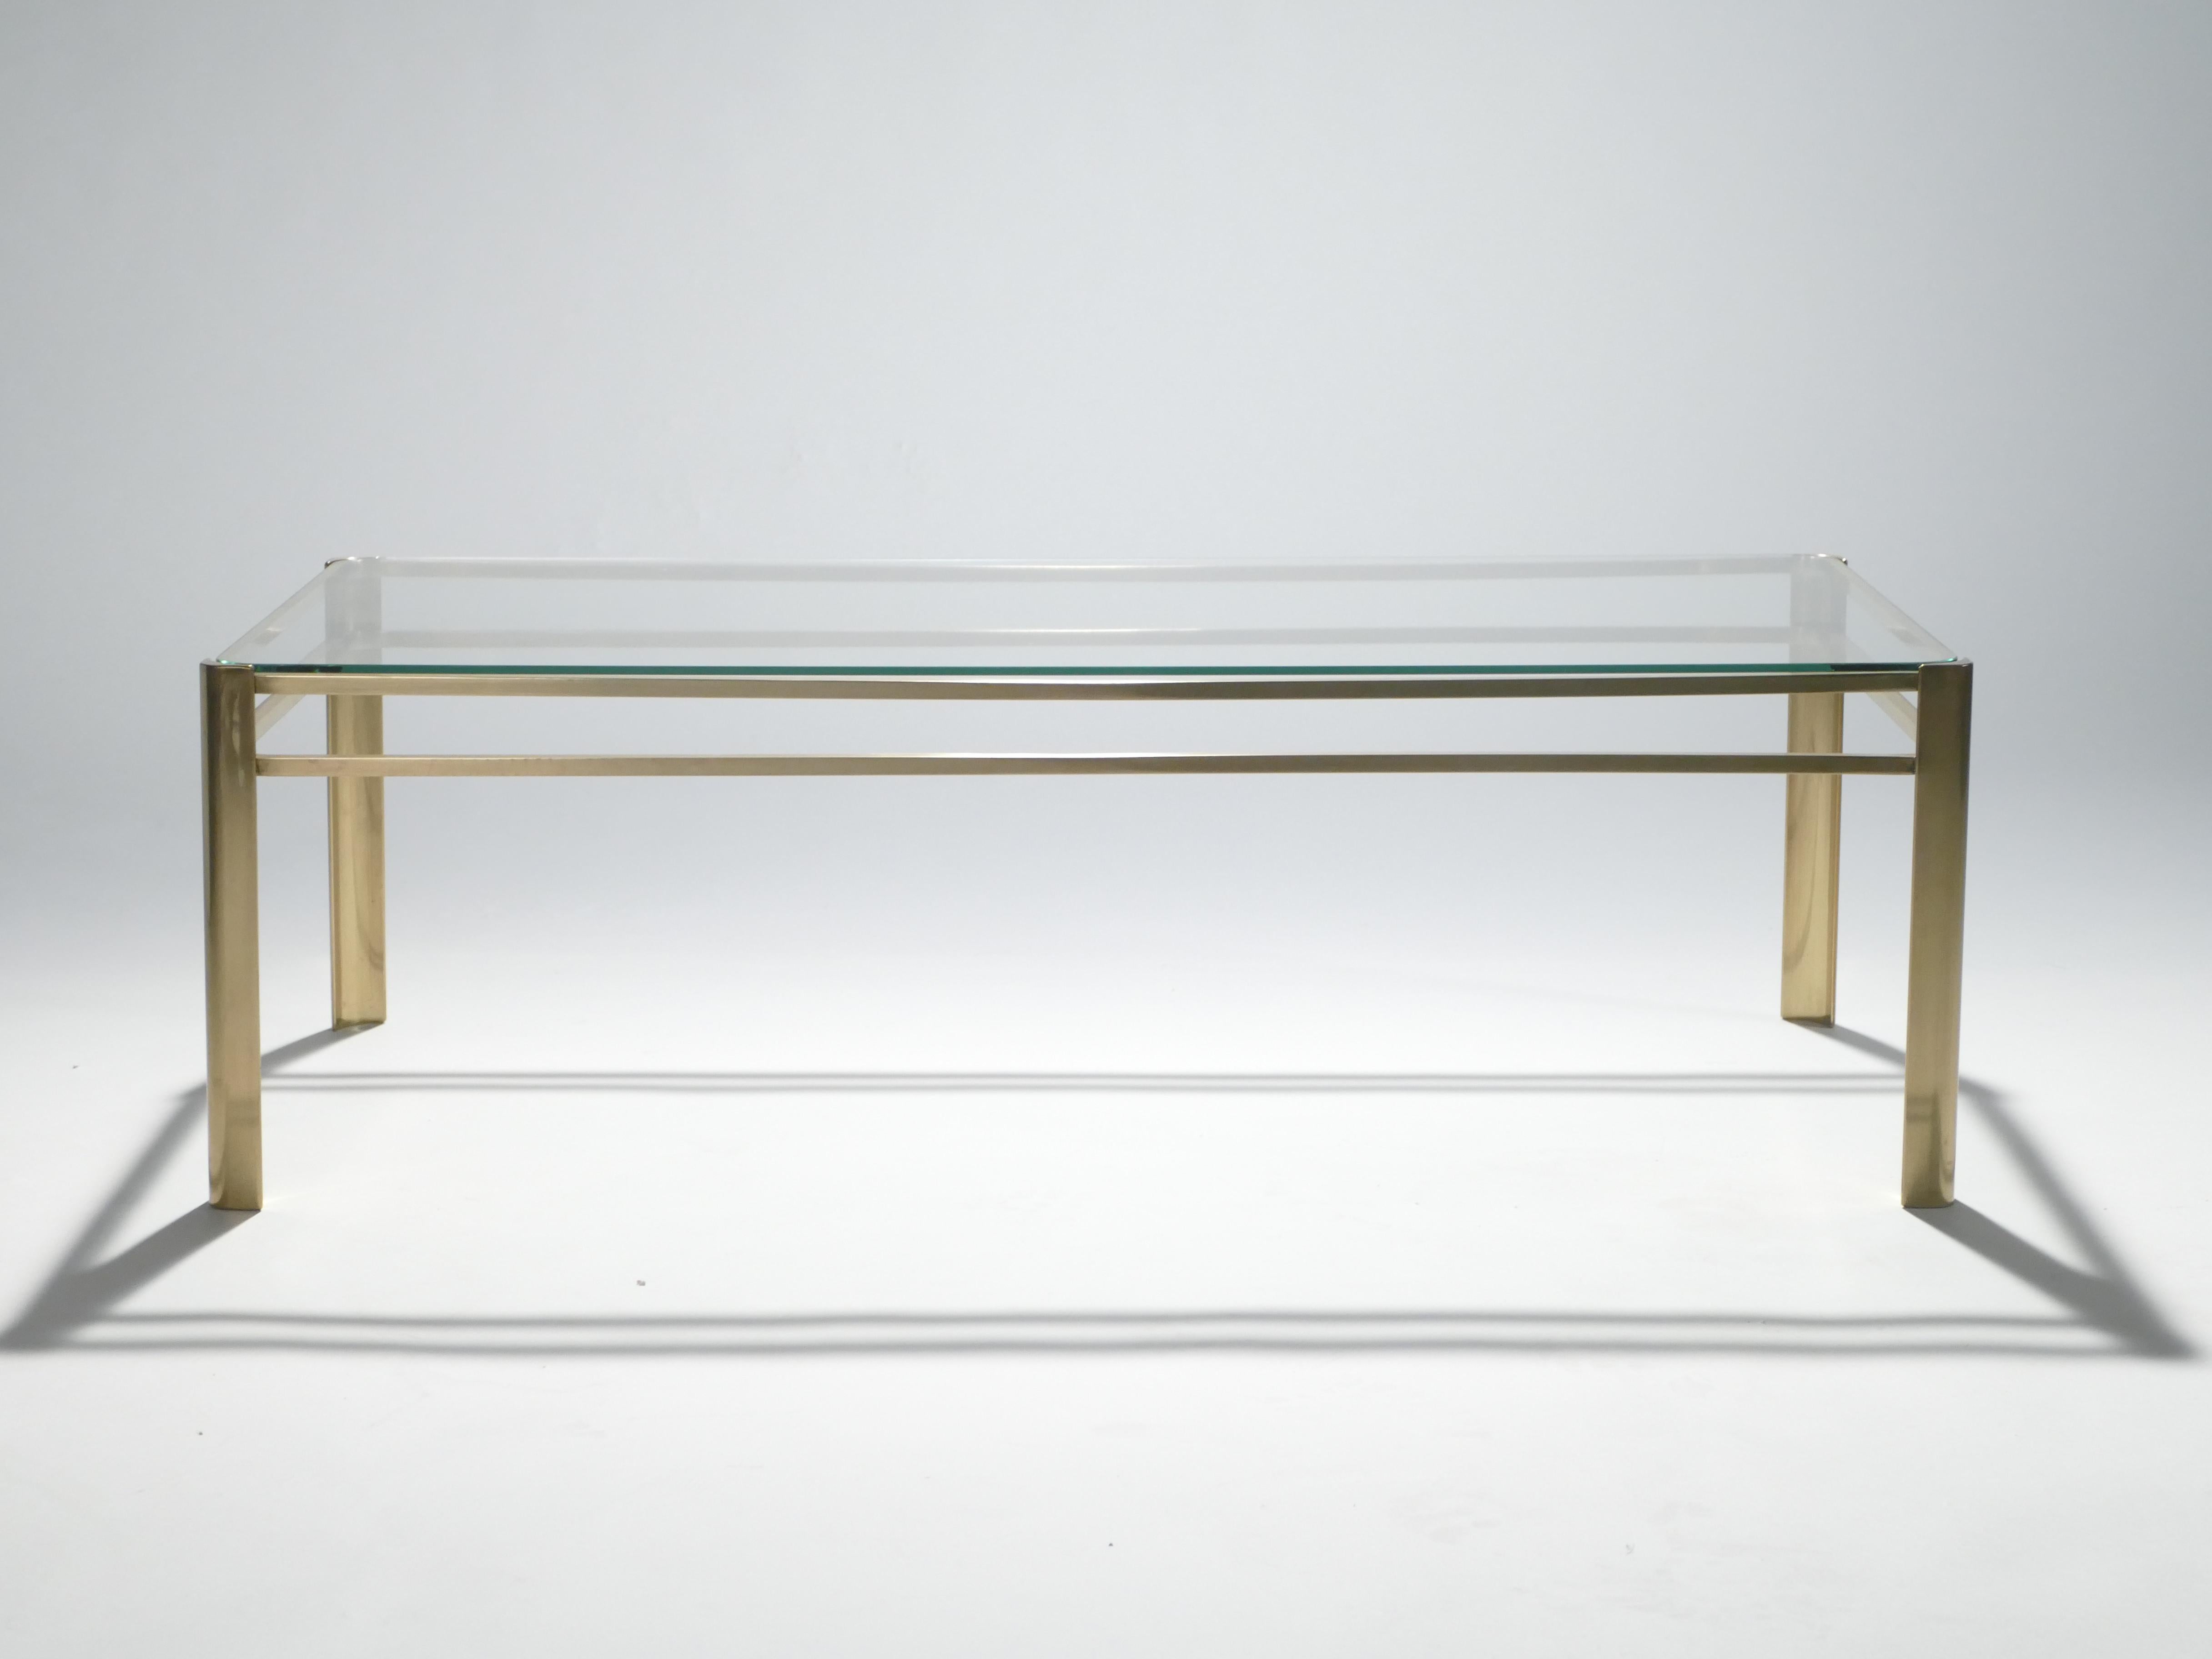 Midcentury Bronze Coffee Table by Jacques Quinet for Broncz, 1960s (Moderne der Mitte des Jahrhunderts)